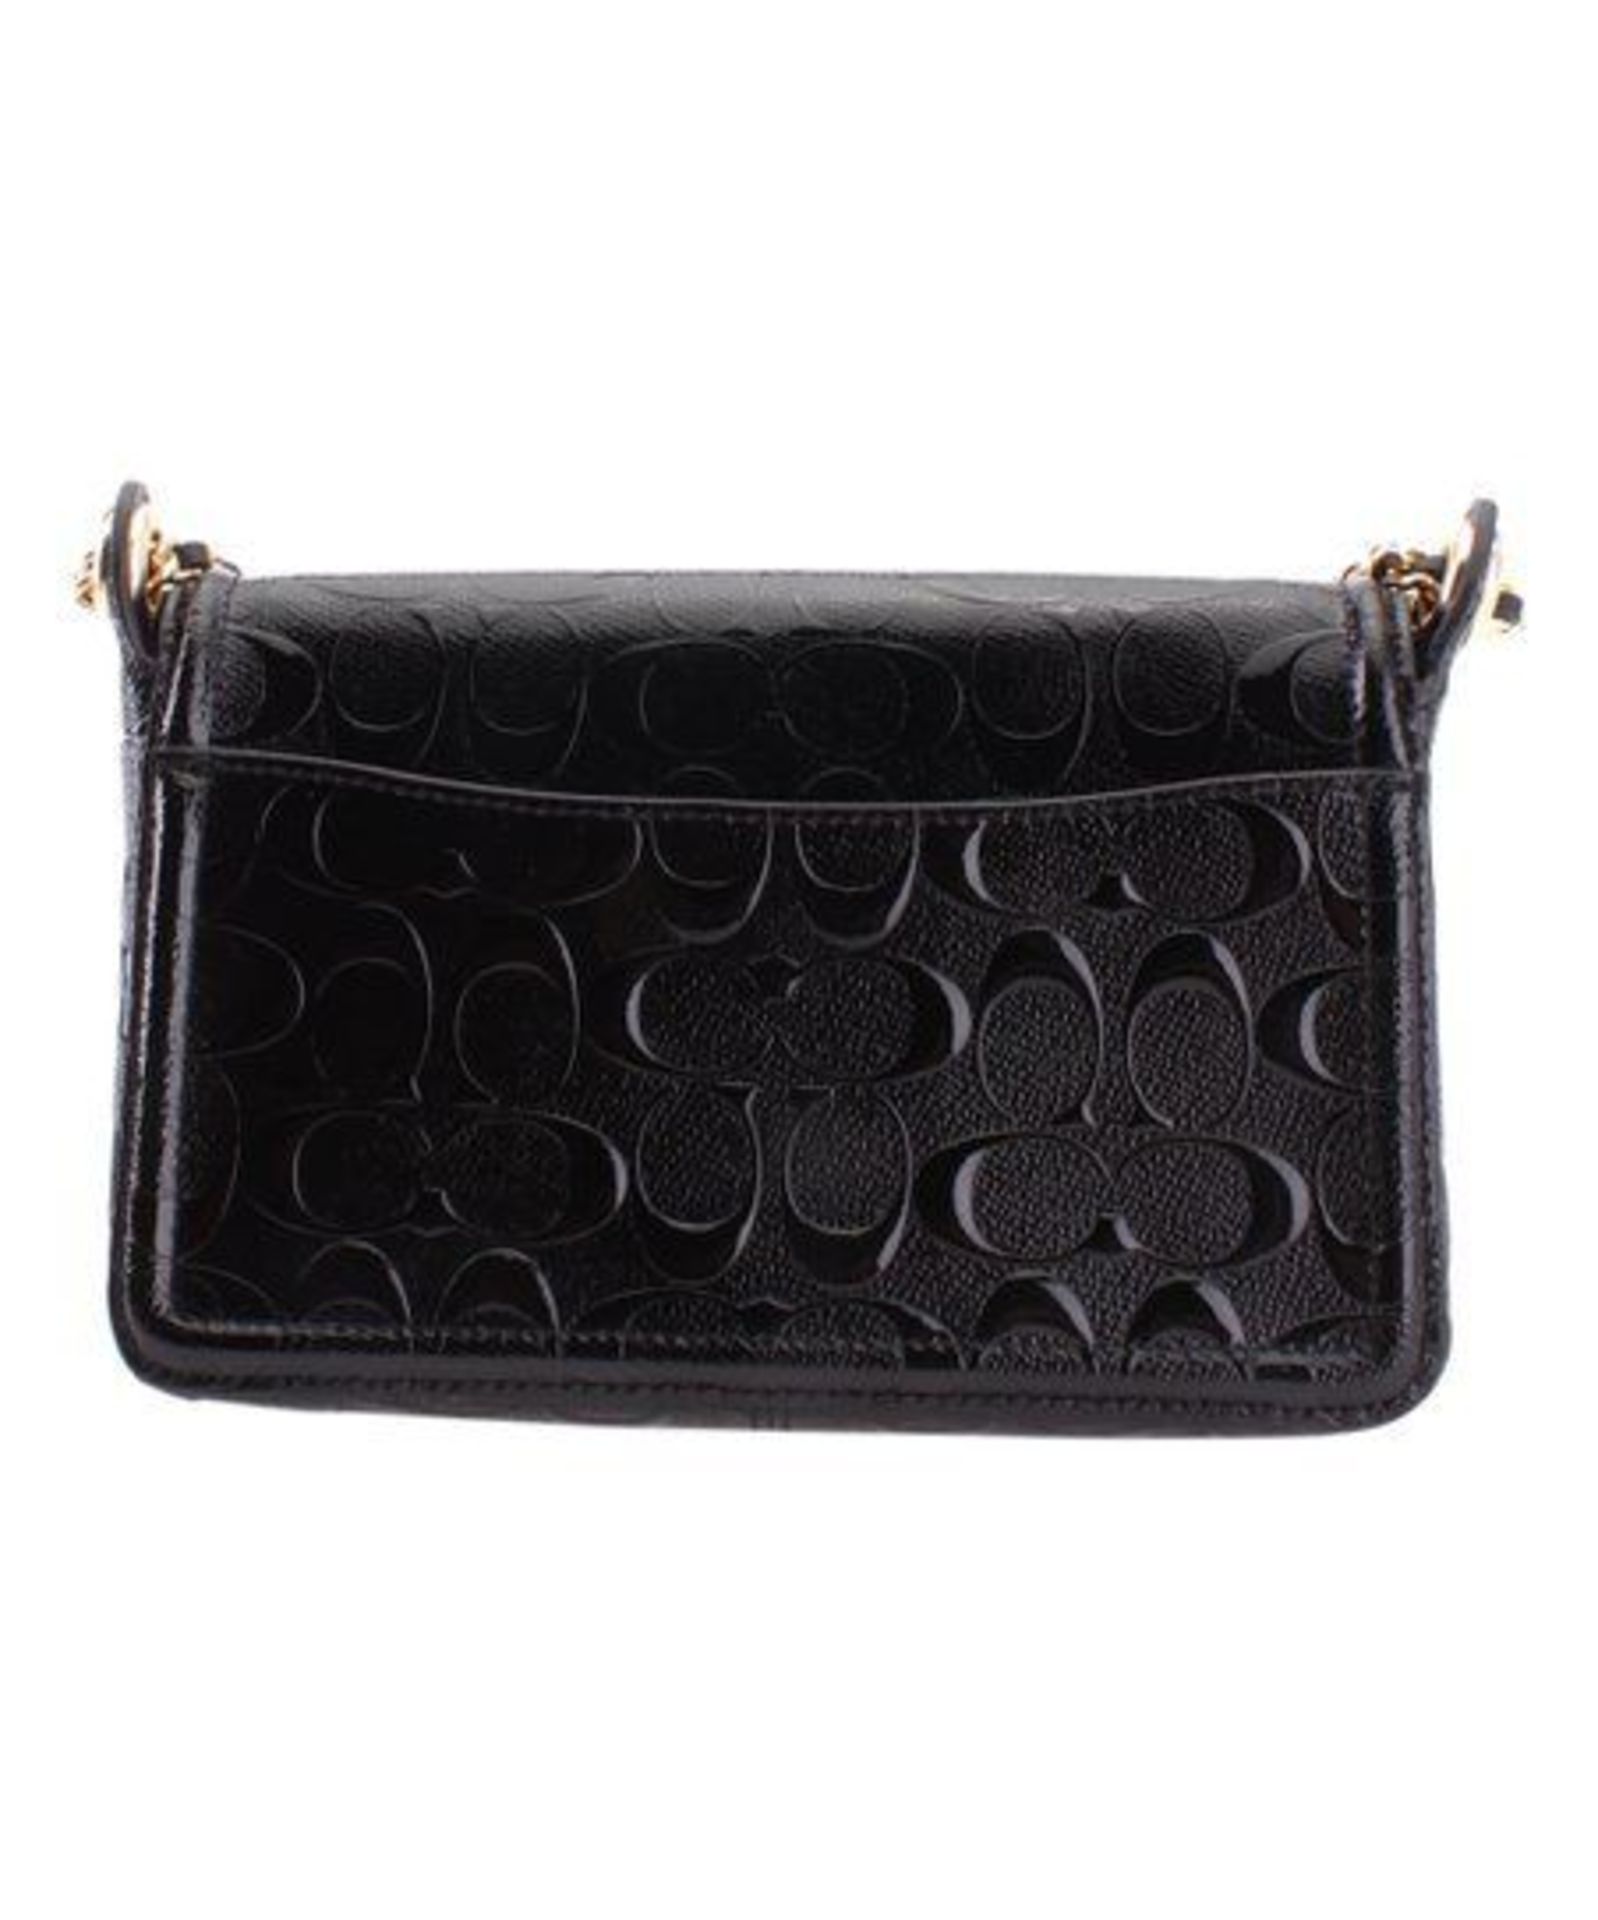 Coach, Black Emblem Embossed Leather Crossbody Bag (New With Tags) [Ref: 53029506Tfshelf]-Tf - Image 2 of 4